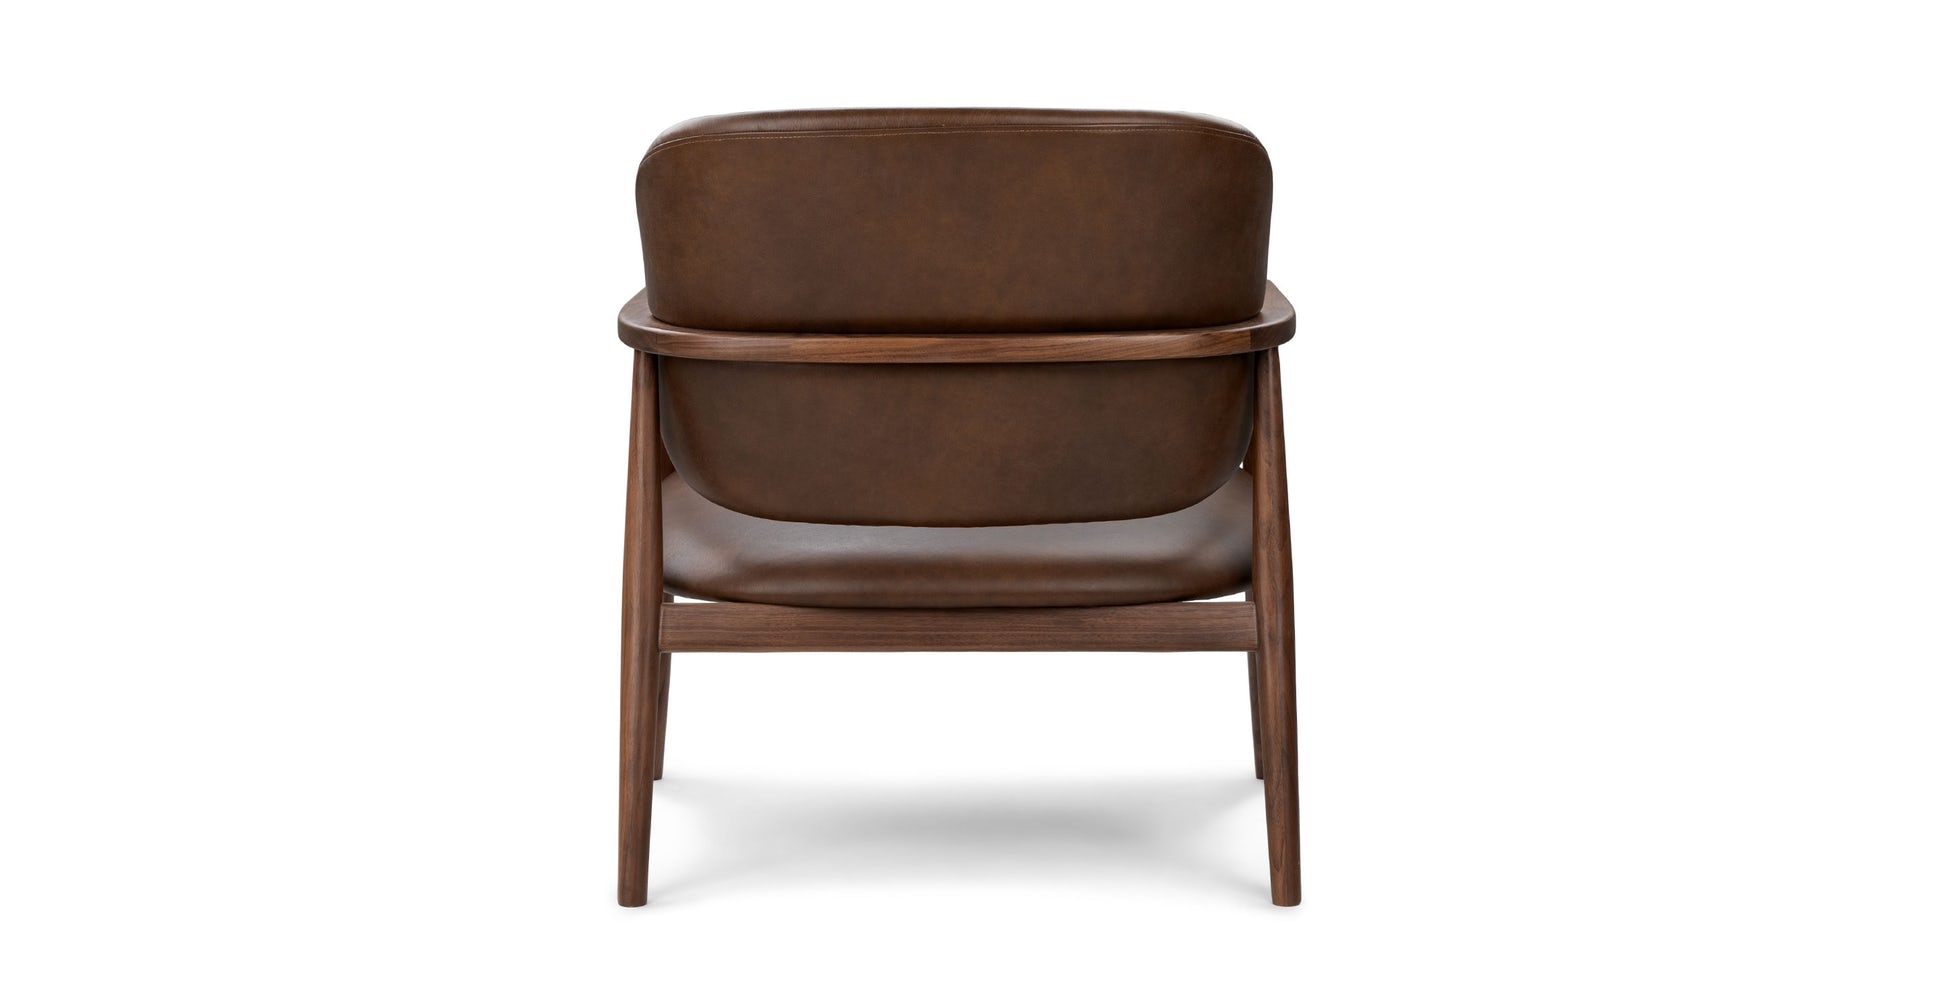 Levo brown leather lounge chair - Image 3